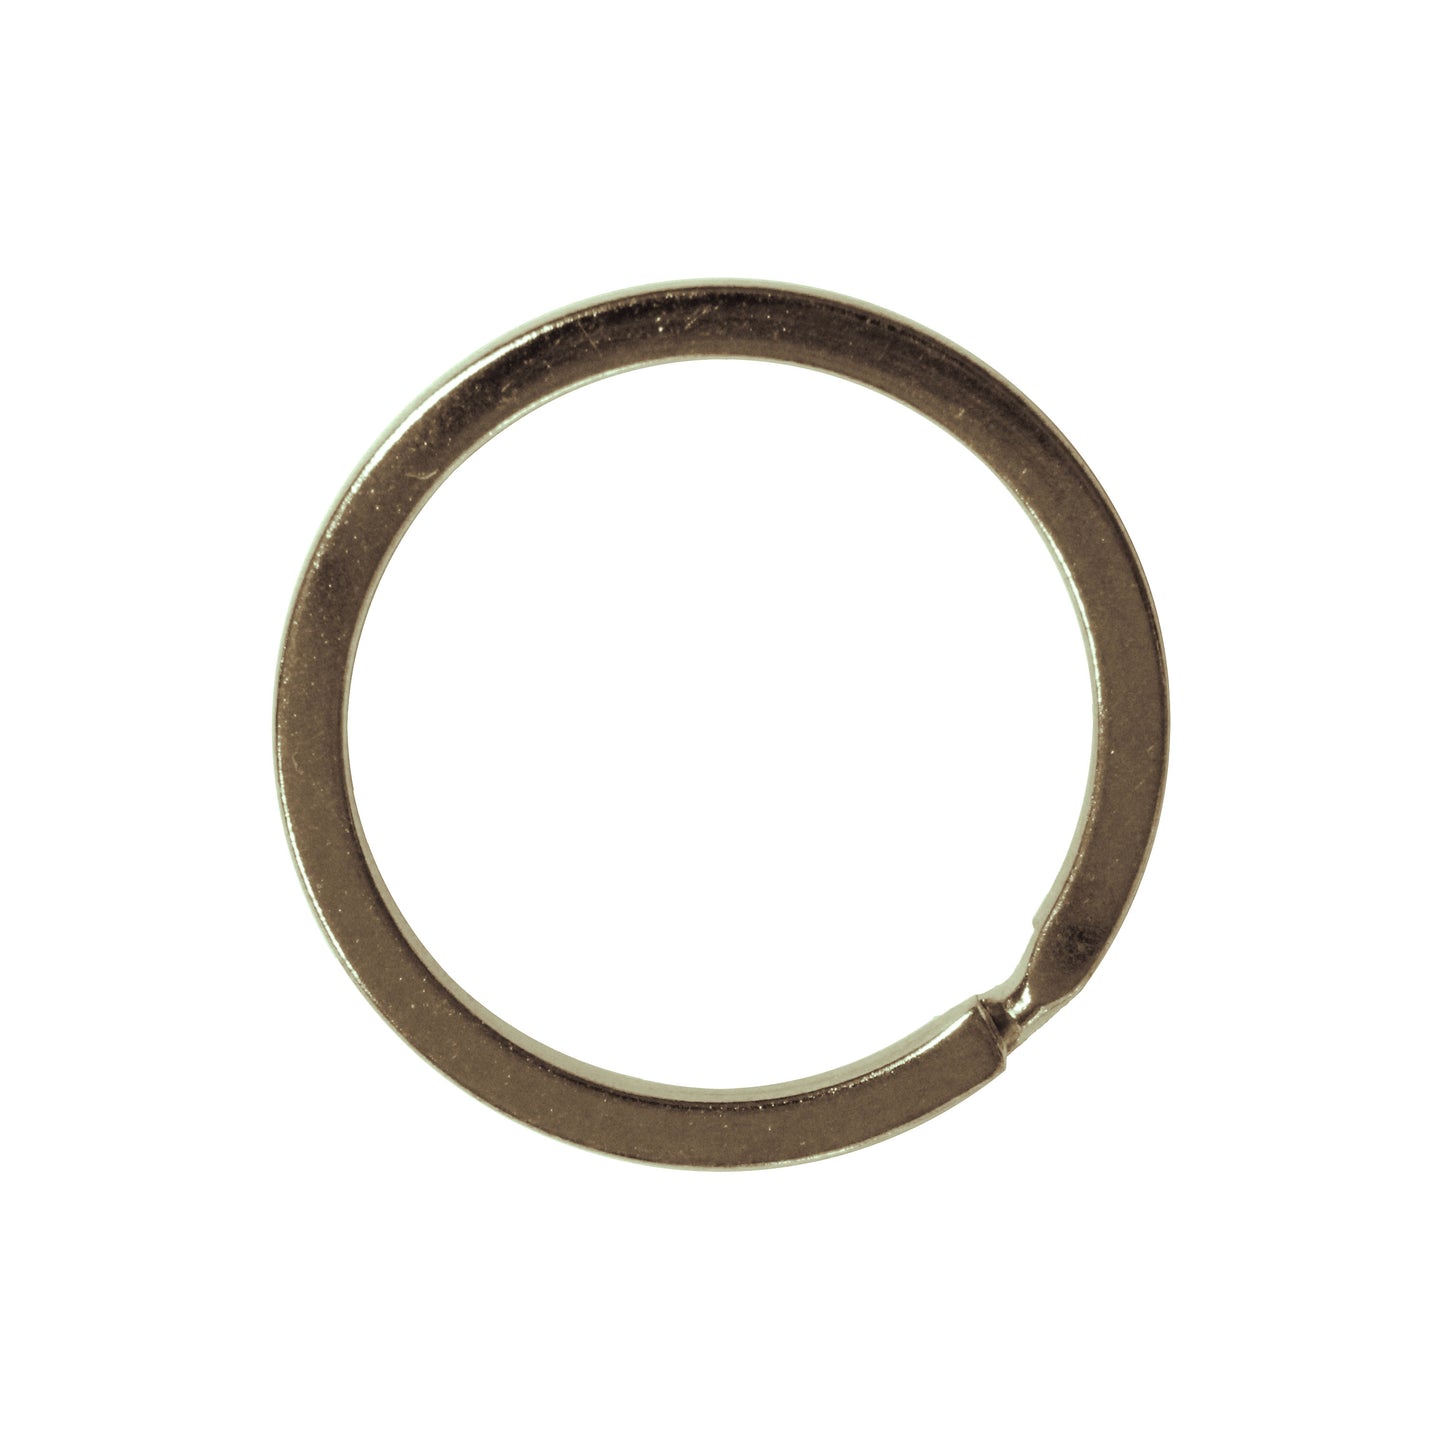 30mm Antique Bronze Split Ring / sold individually / for key rings or secure charms or tags